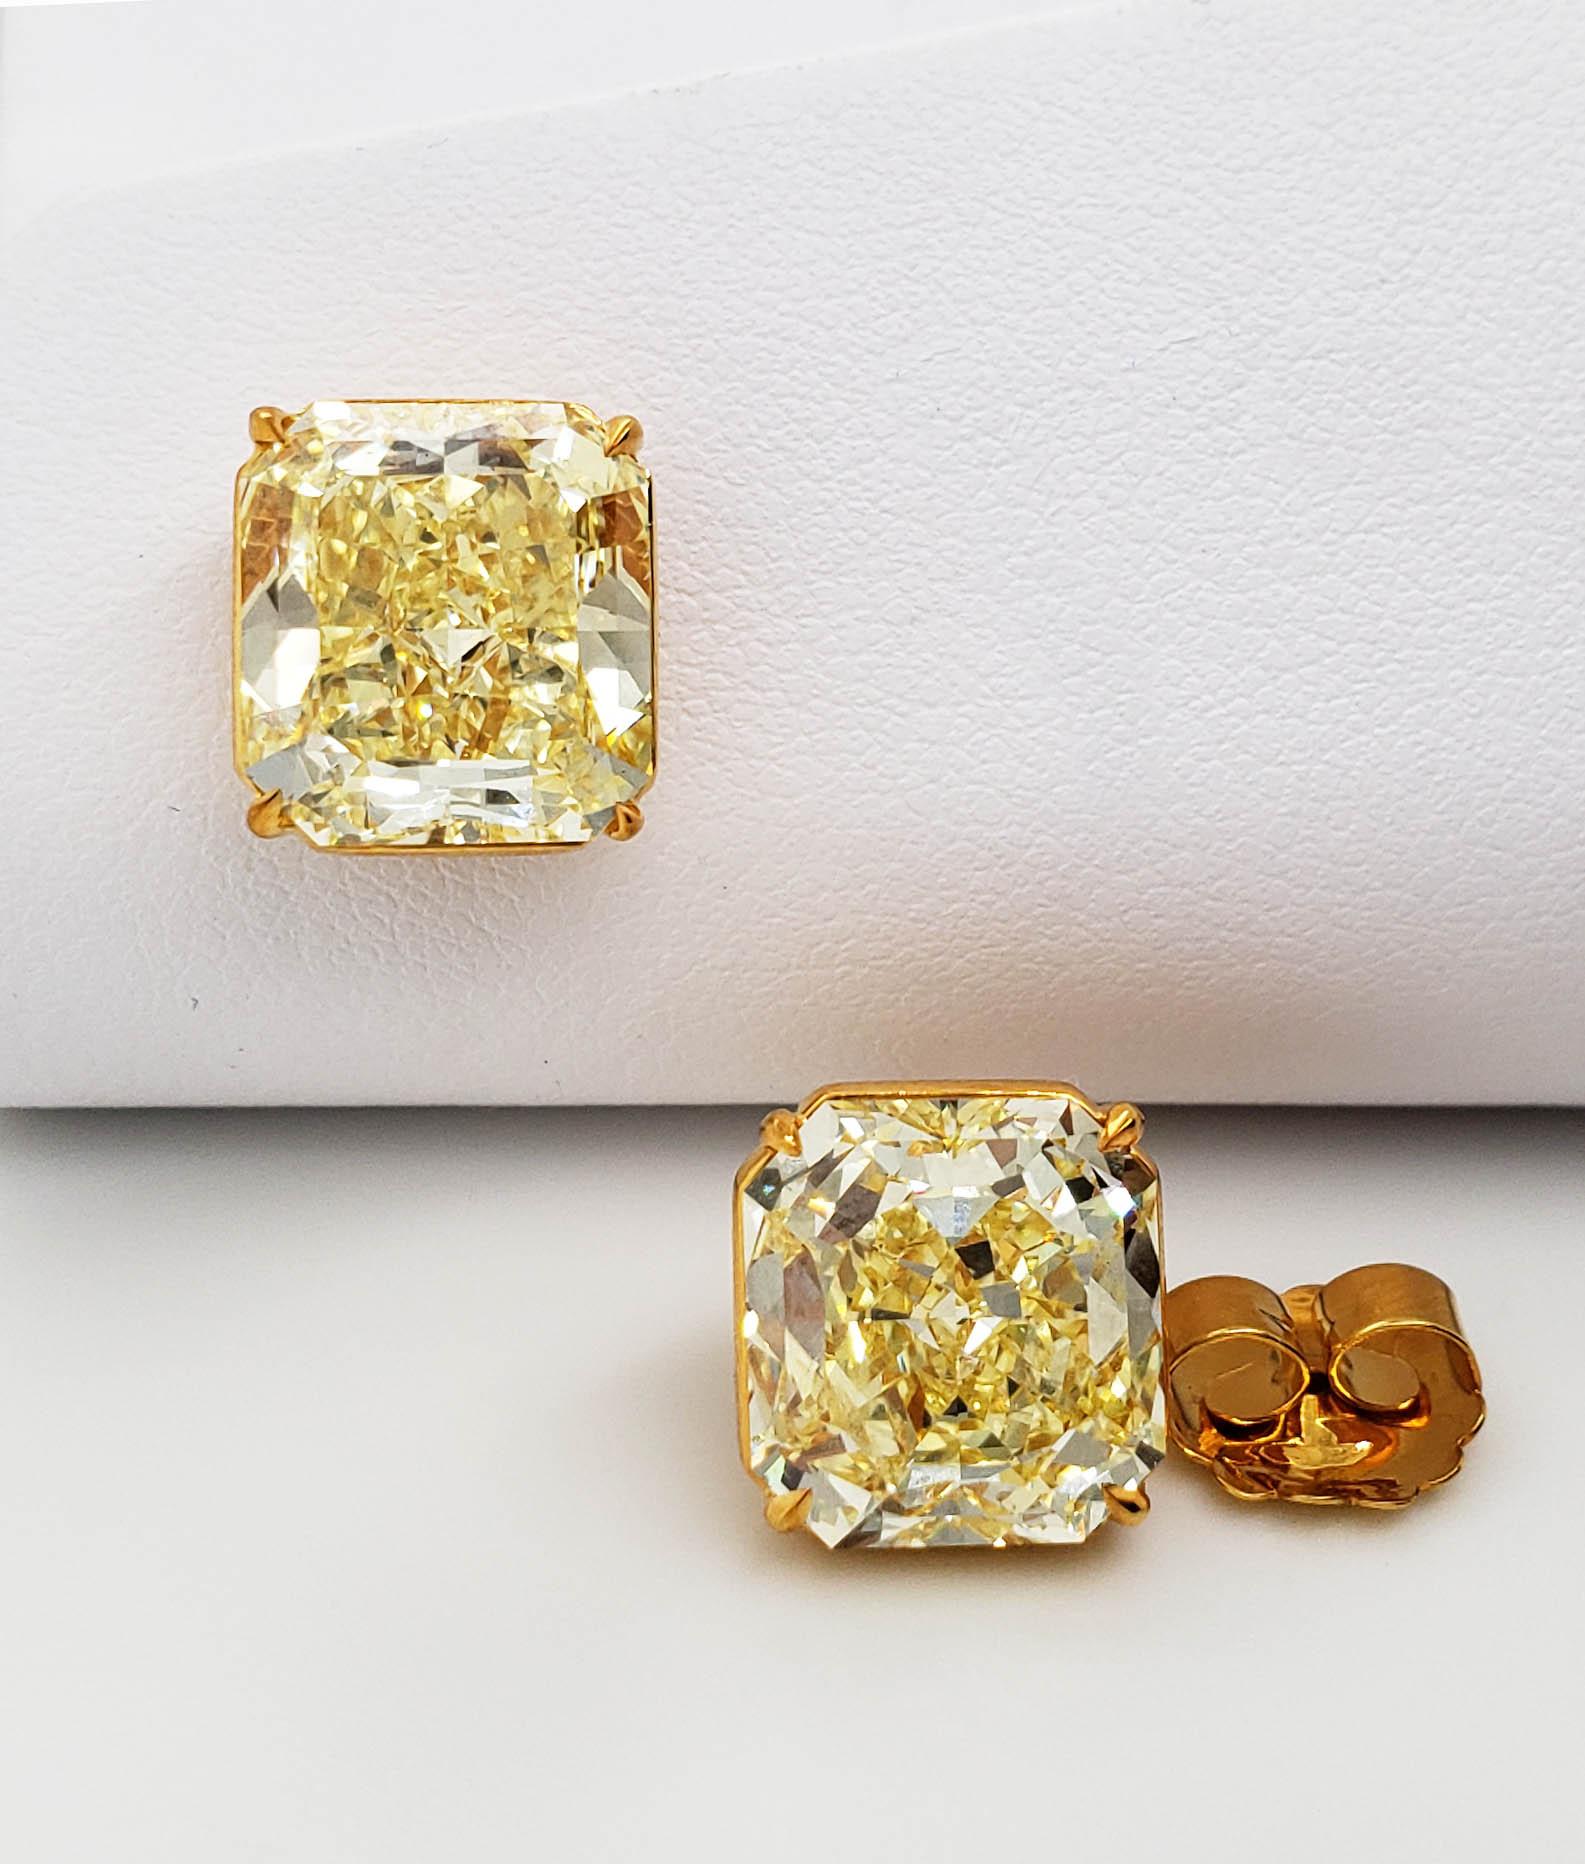 Contemporary Scarselli Stud Earrings 7 carat Yellow Diamond each set in 18k Yellow Gold